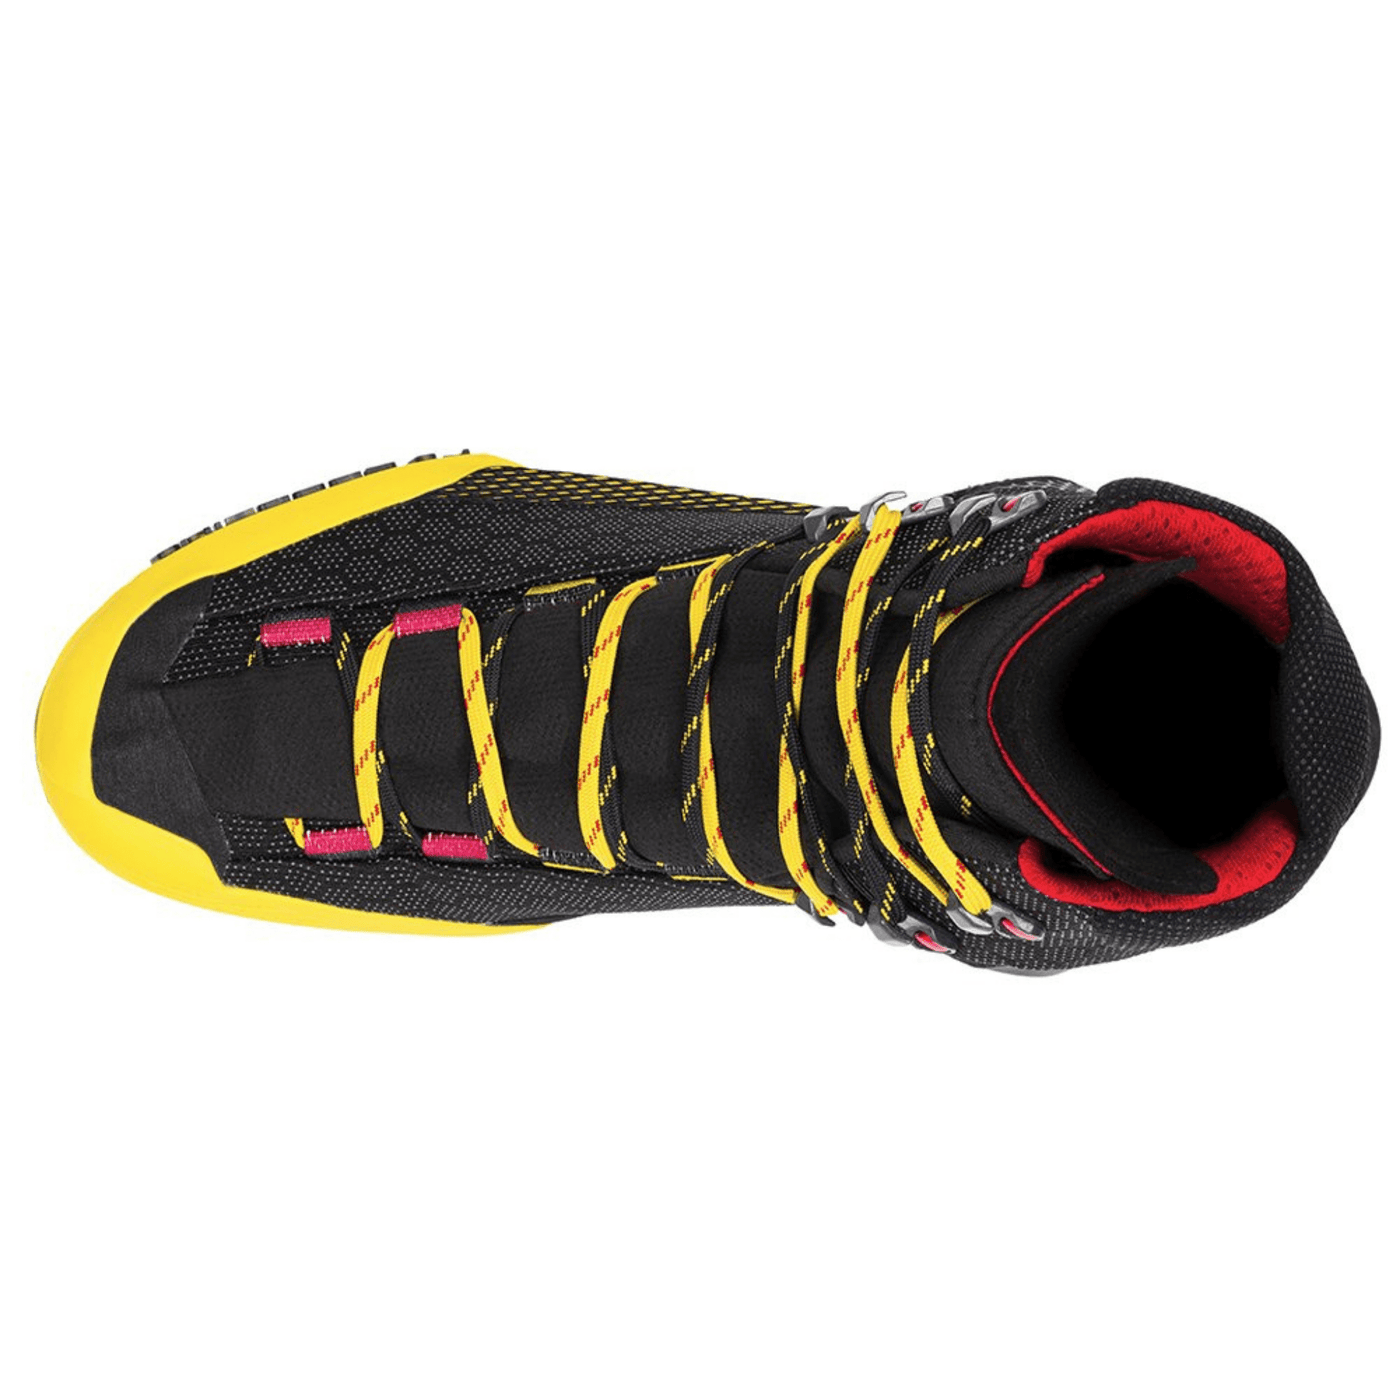 La Sportiva Aequilibrium ST GTX | Mountaineering & Alpine Boots | Further Faster Christchurch NZ #black-yellow